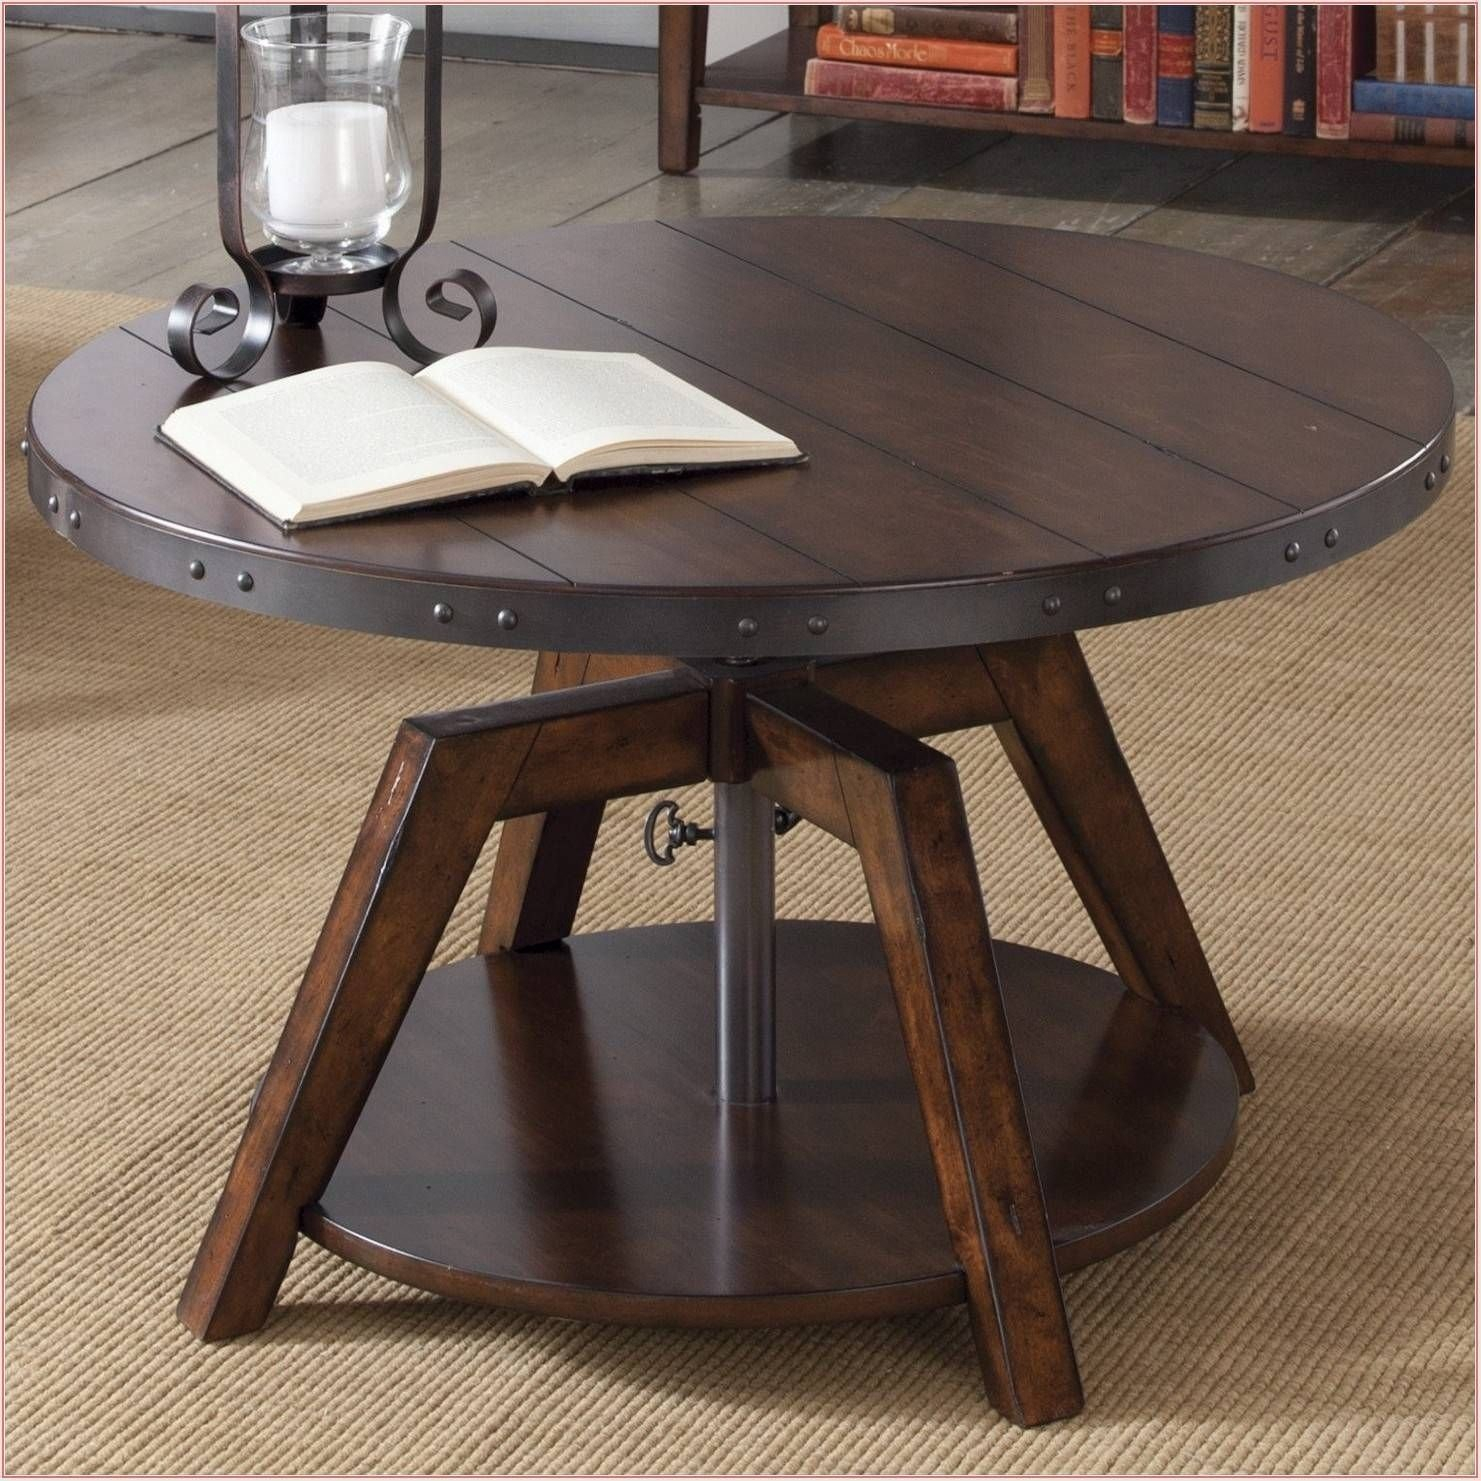 50 Amazing Convertible Coffee Table To Dining Table Up To 70 Off for dimensions 1481 X 1481